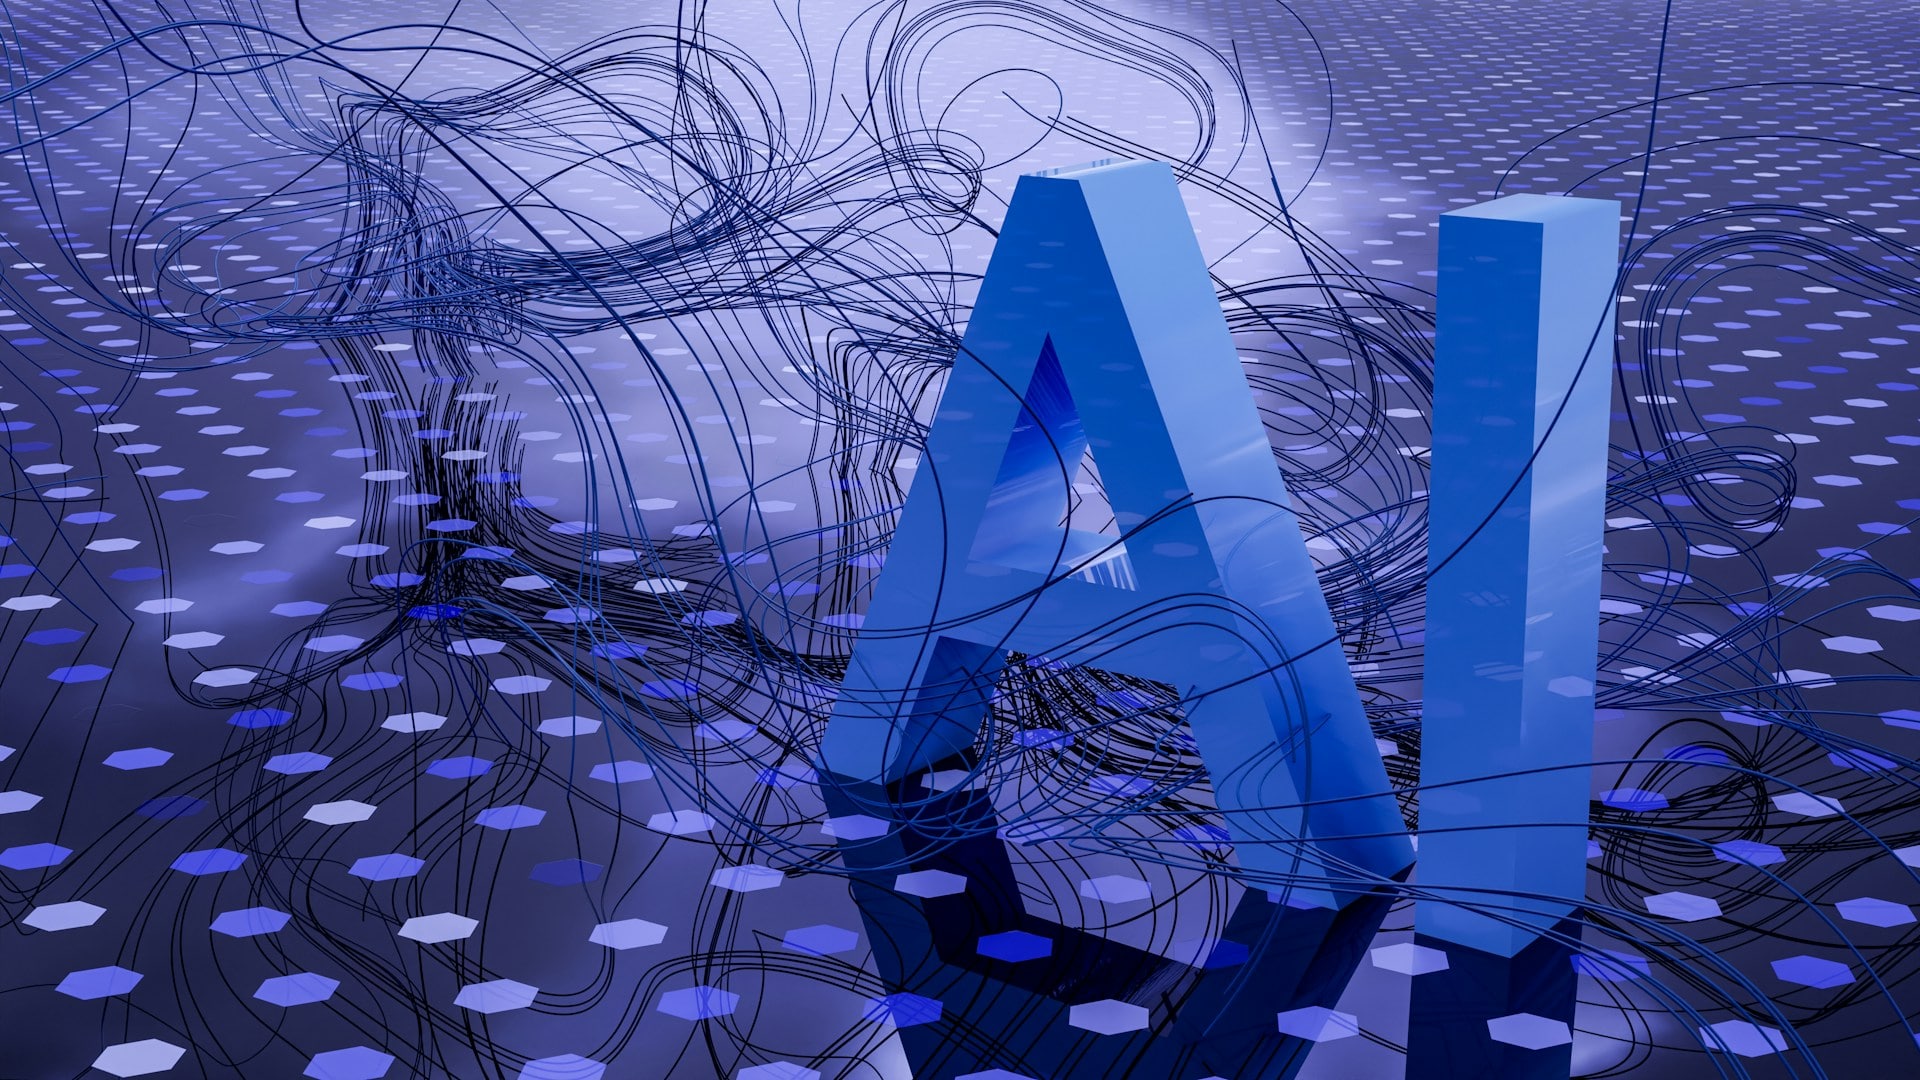 Block letters spelling out "AI" on a blue surface with hexagon print in different shades of blue. This represents the growing role of AI in the process of guided selling.